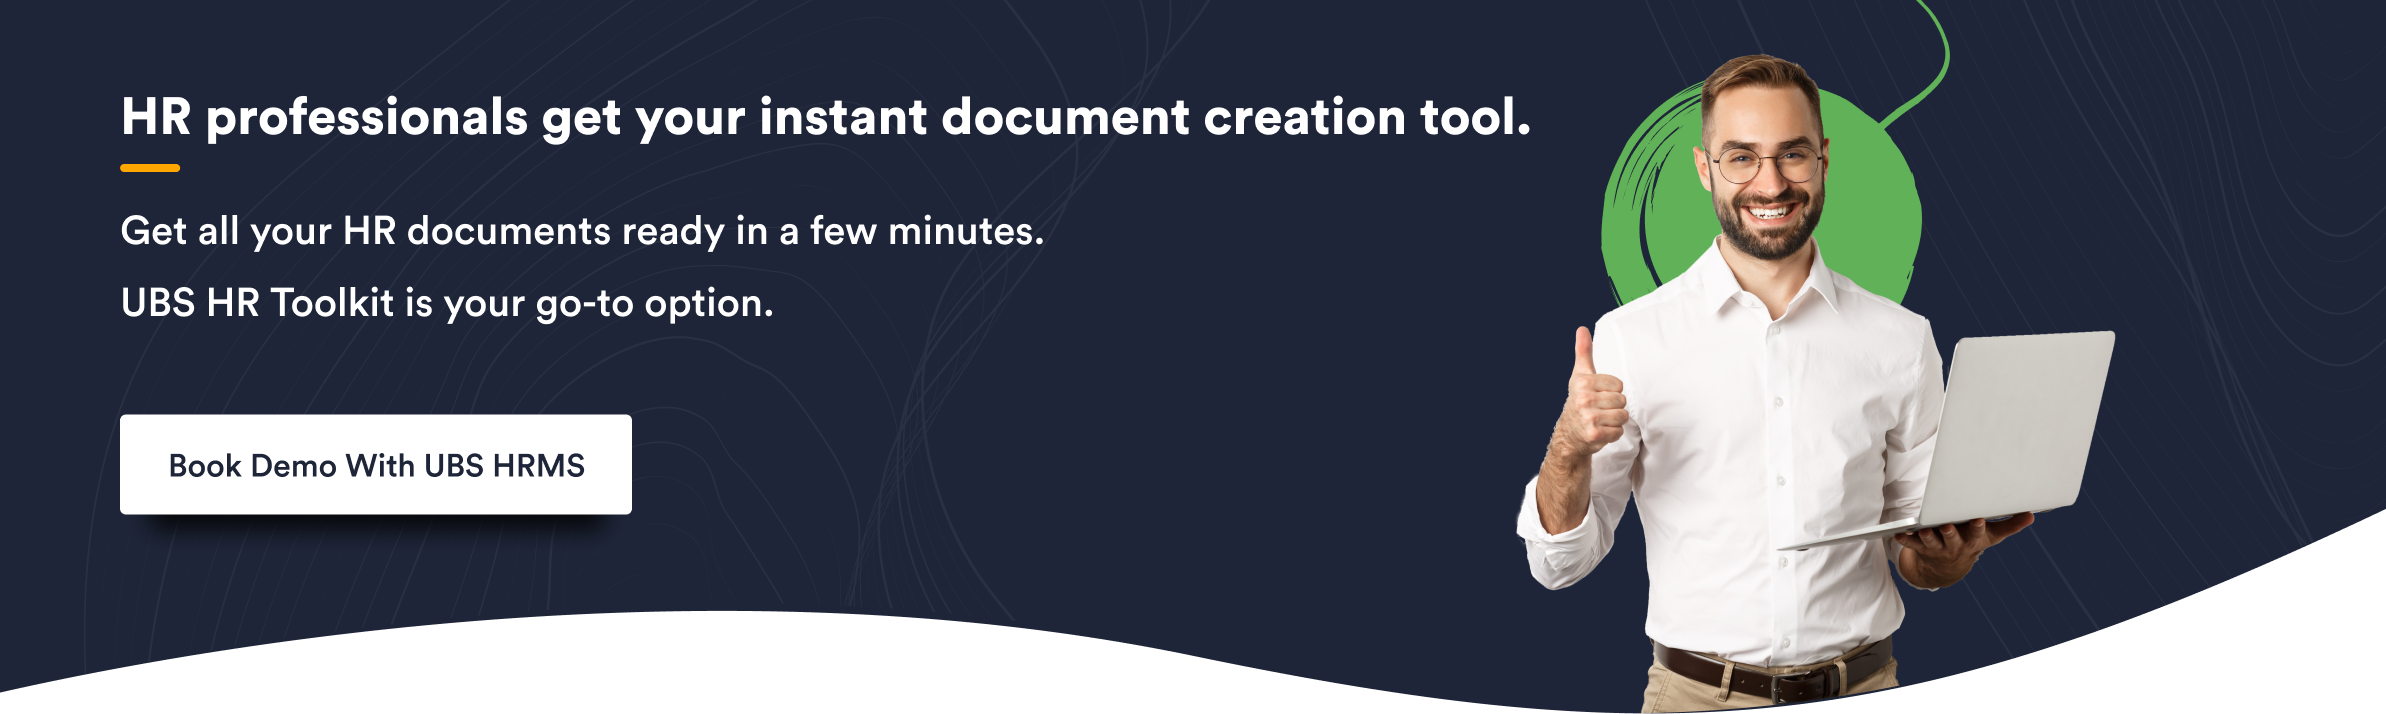 HR professionals get your instant document creation tool.